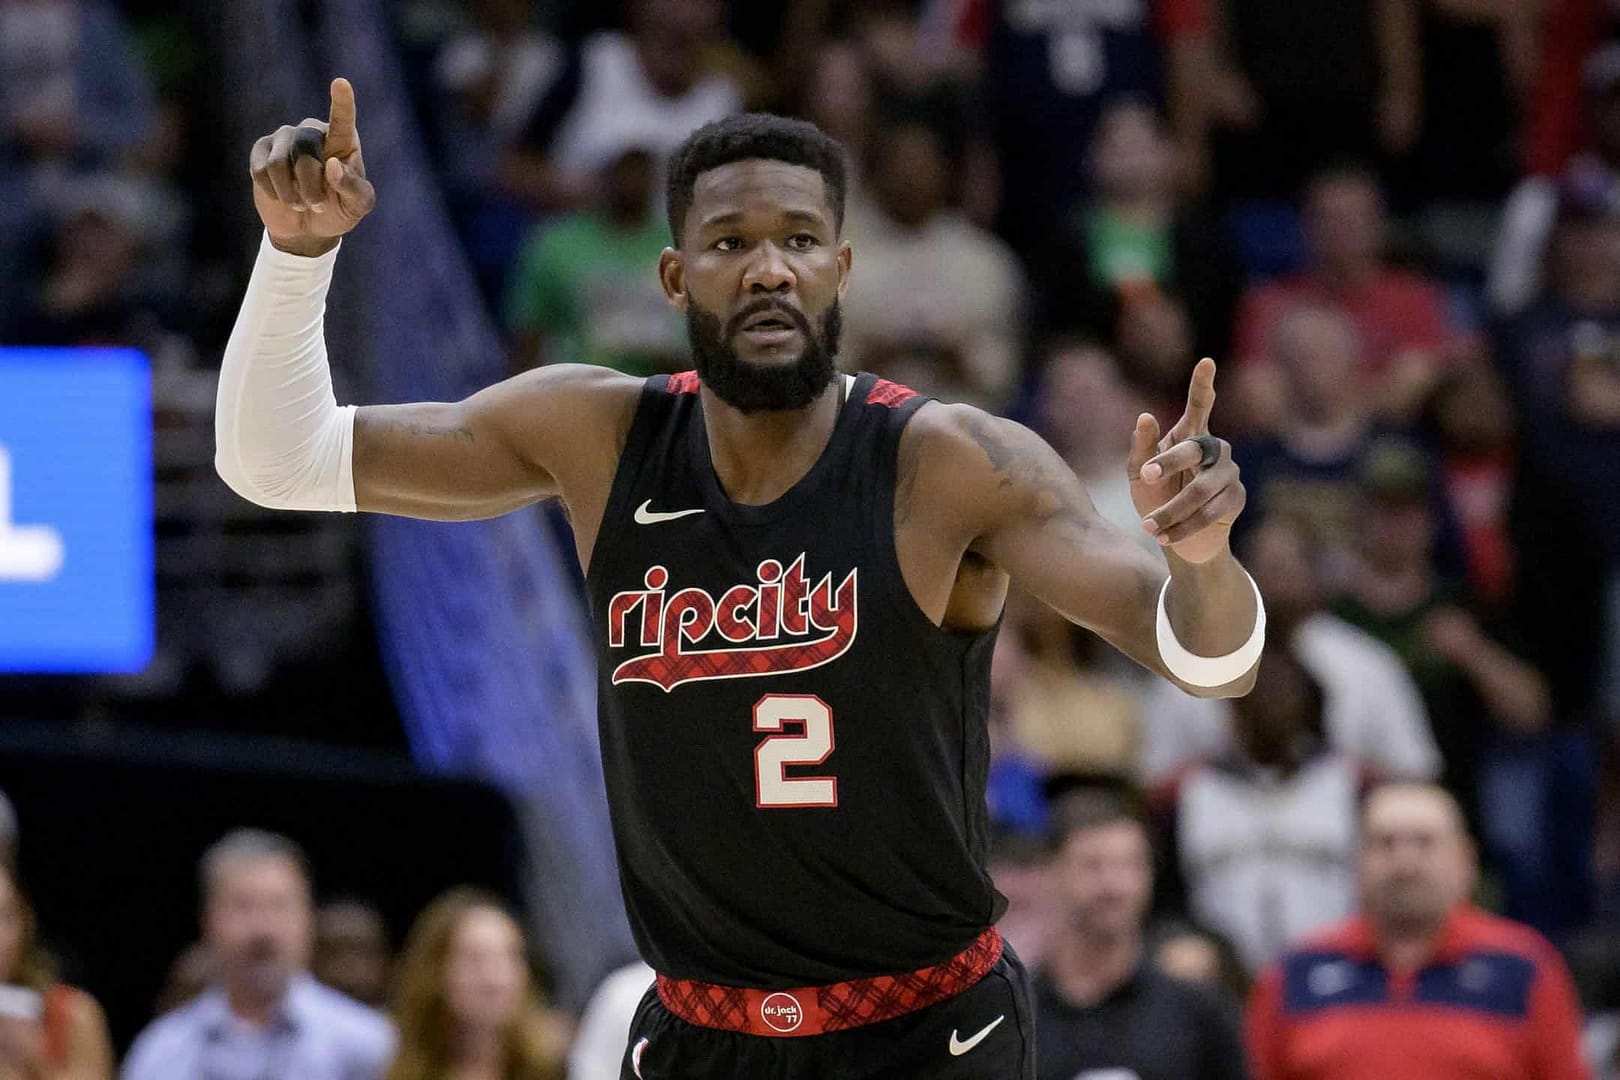 The best NBA player prop bets and picks today for Friday, March 29, include wagers on Deandre Ayton and Aaron Gordon...